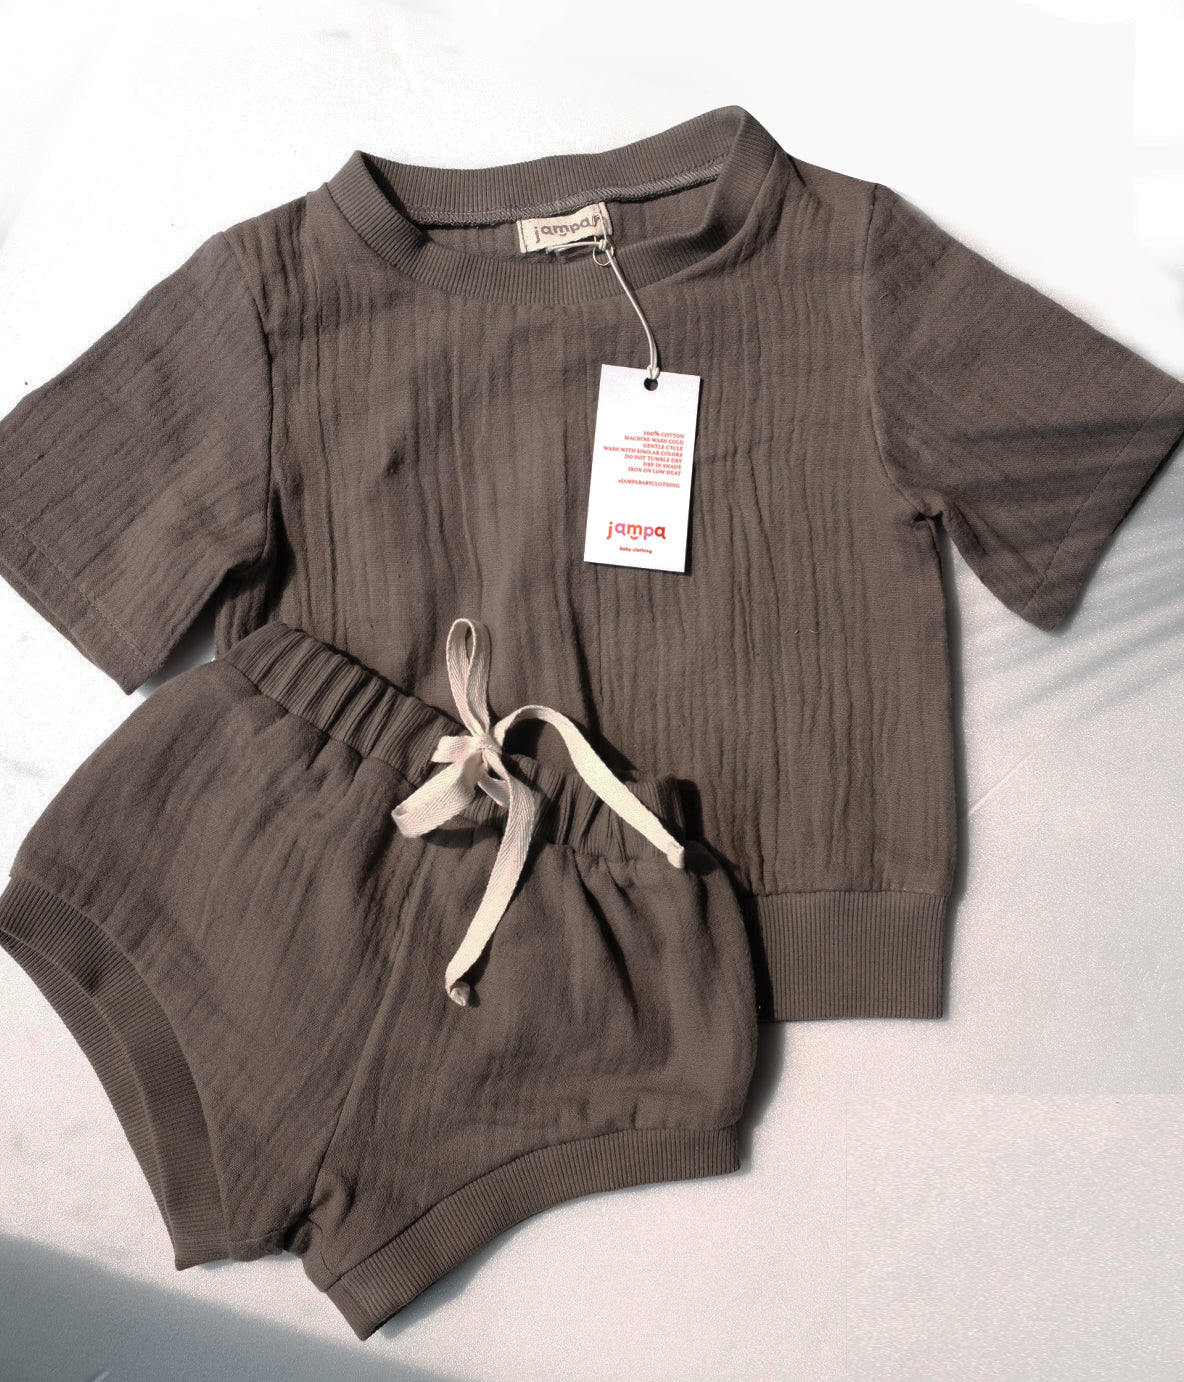 Designer Baby's Clothes in Ipaja for sale ▷ Prices on